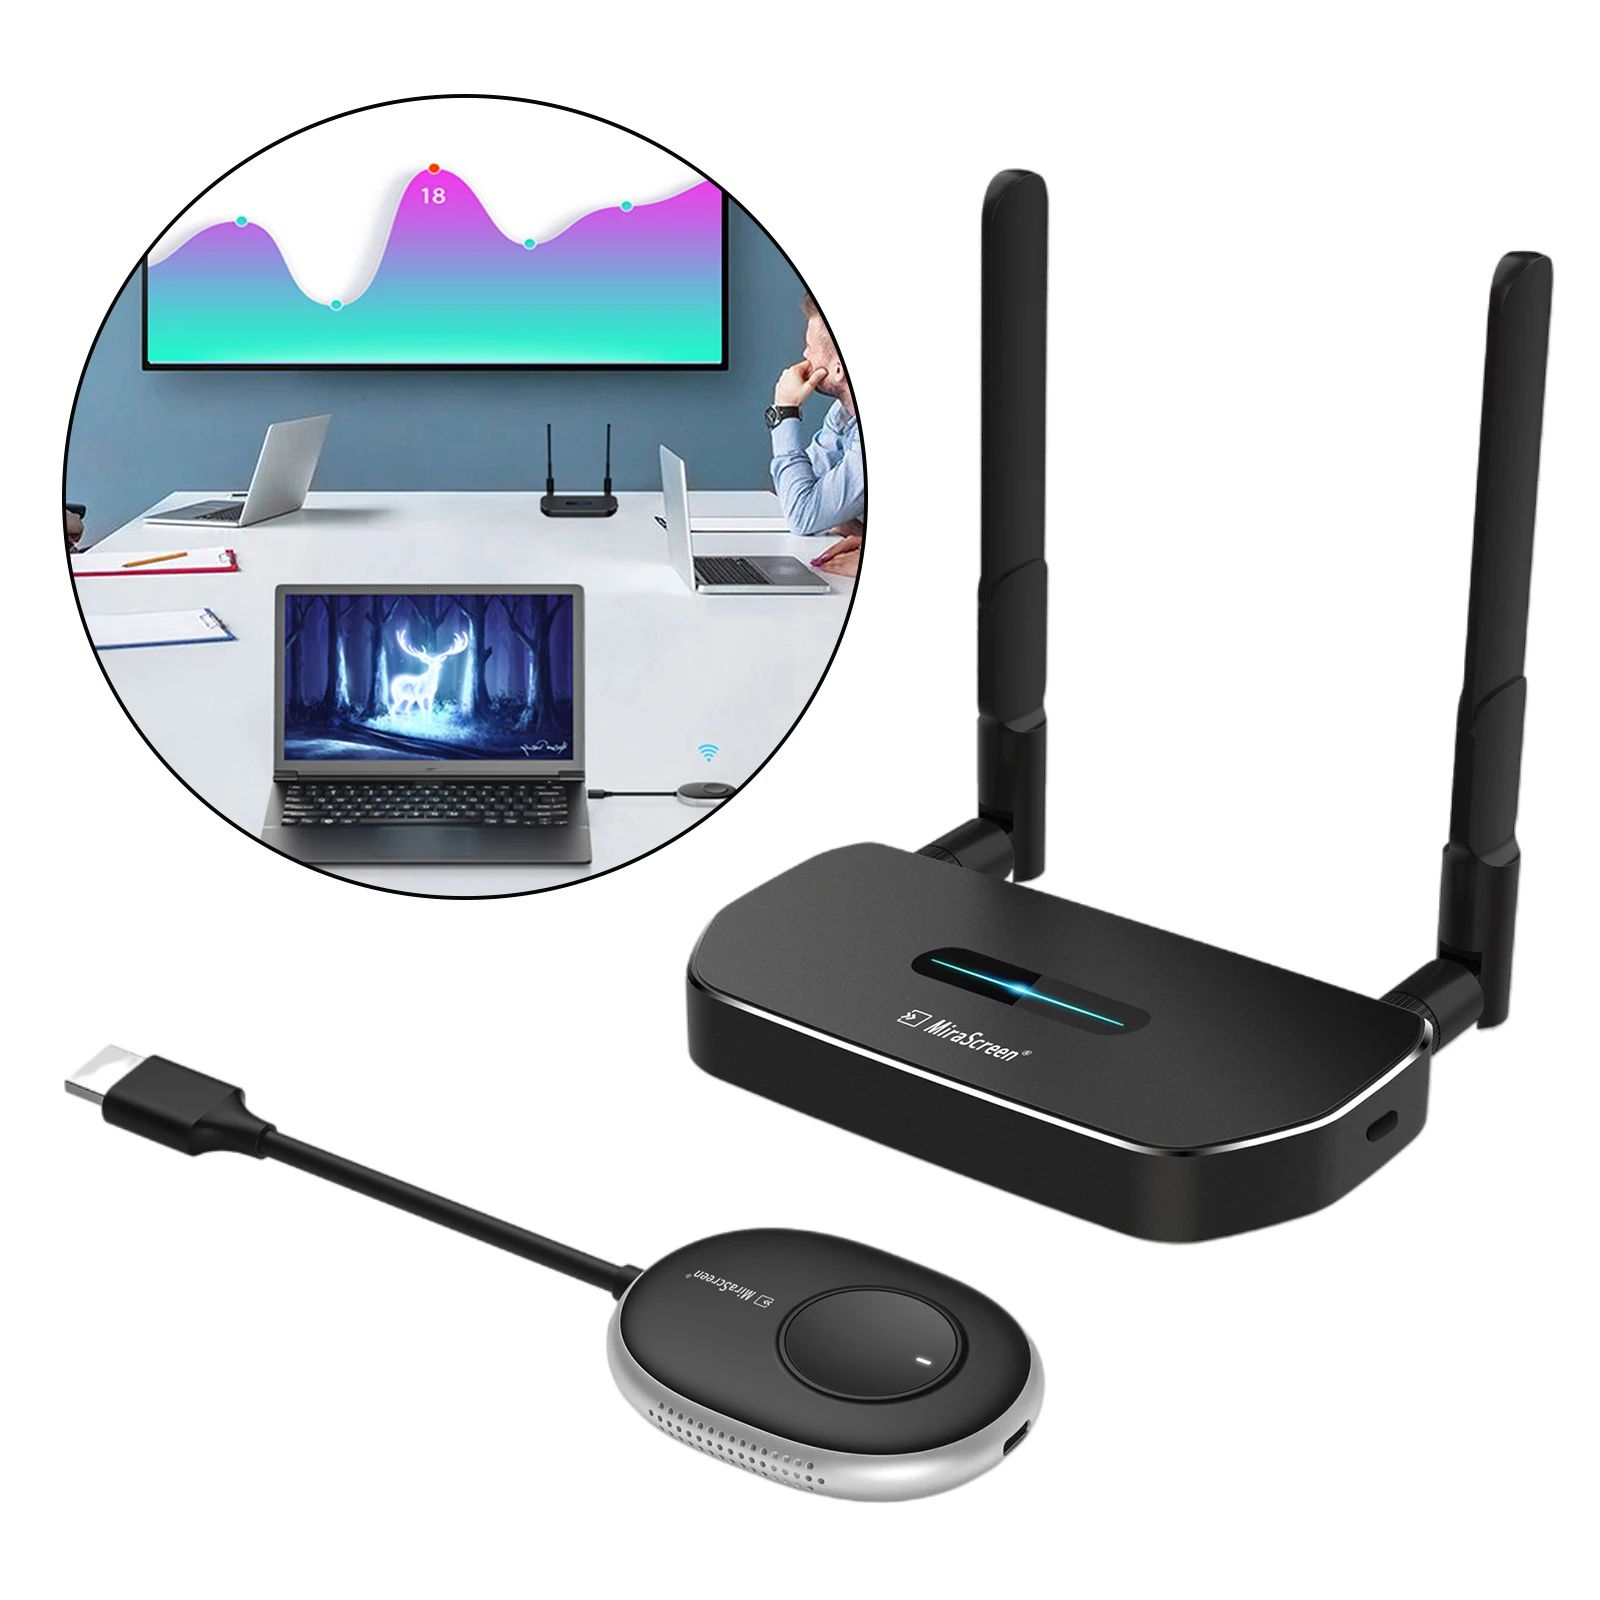 Low Latency  VGA Wireless Transmitter and Receiver Audio Adapter Set for Outdoor Use TV Watching Plug & Play No Delay